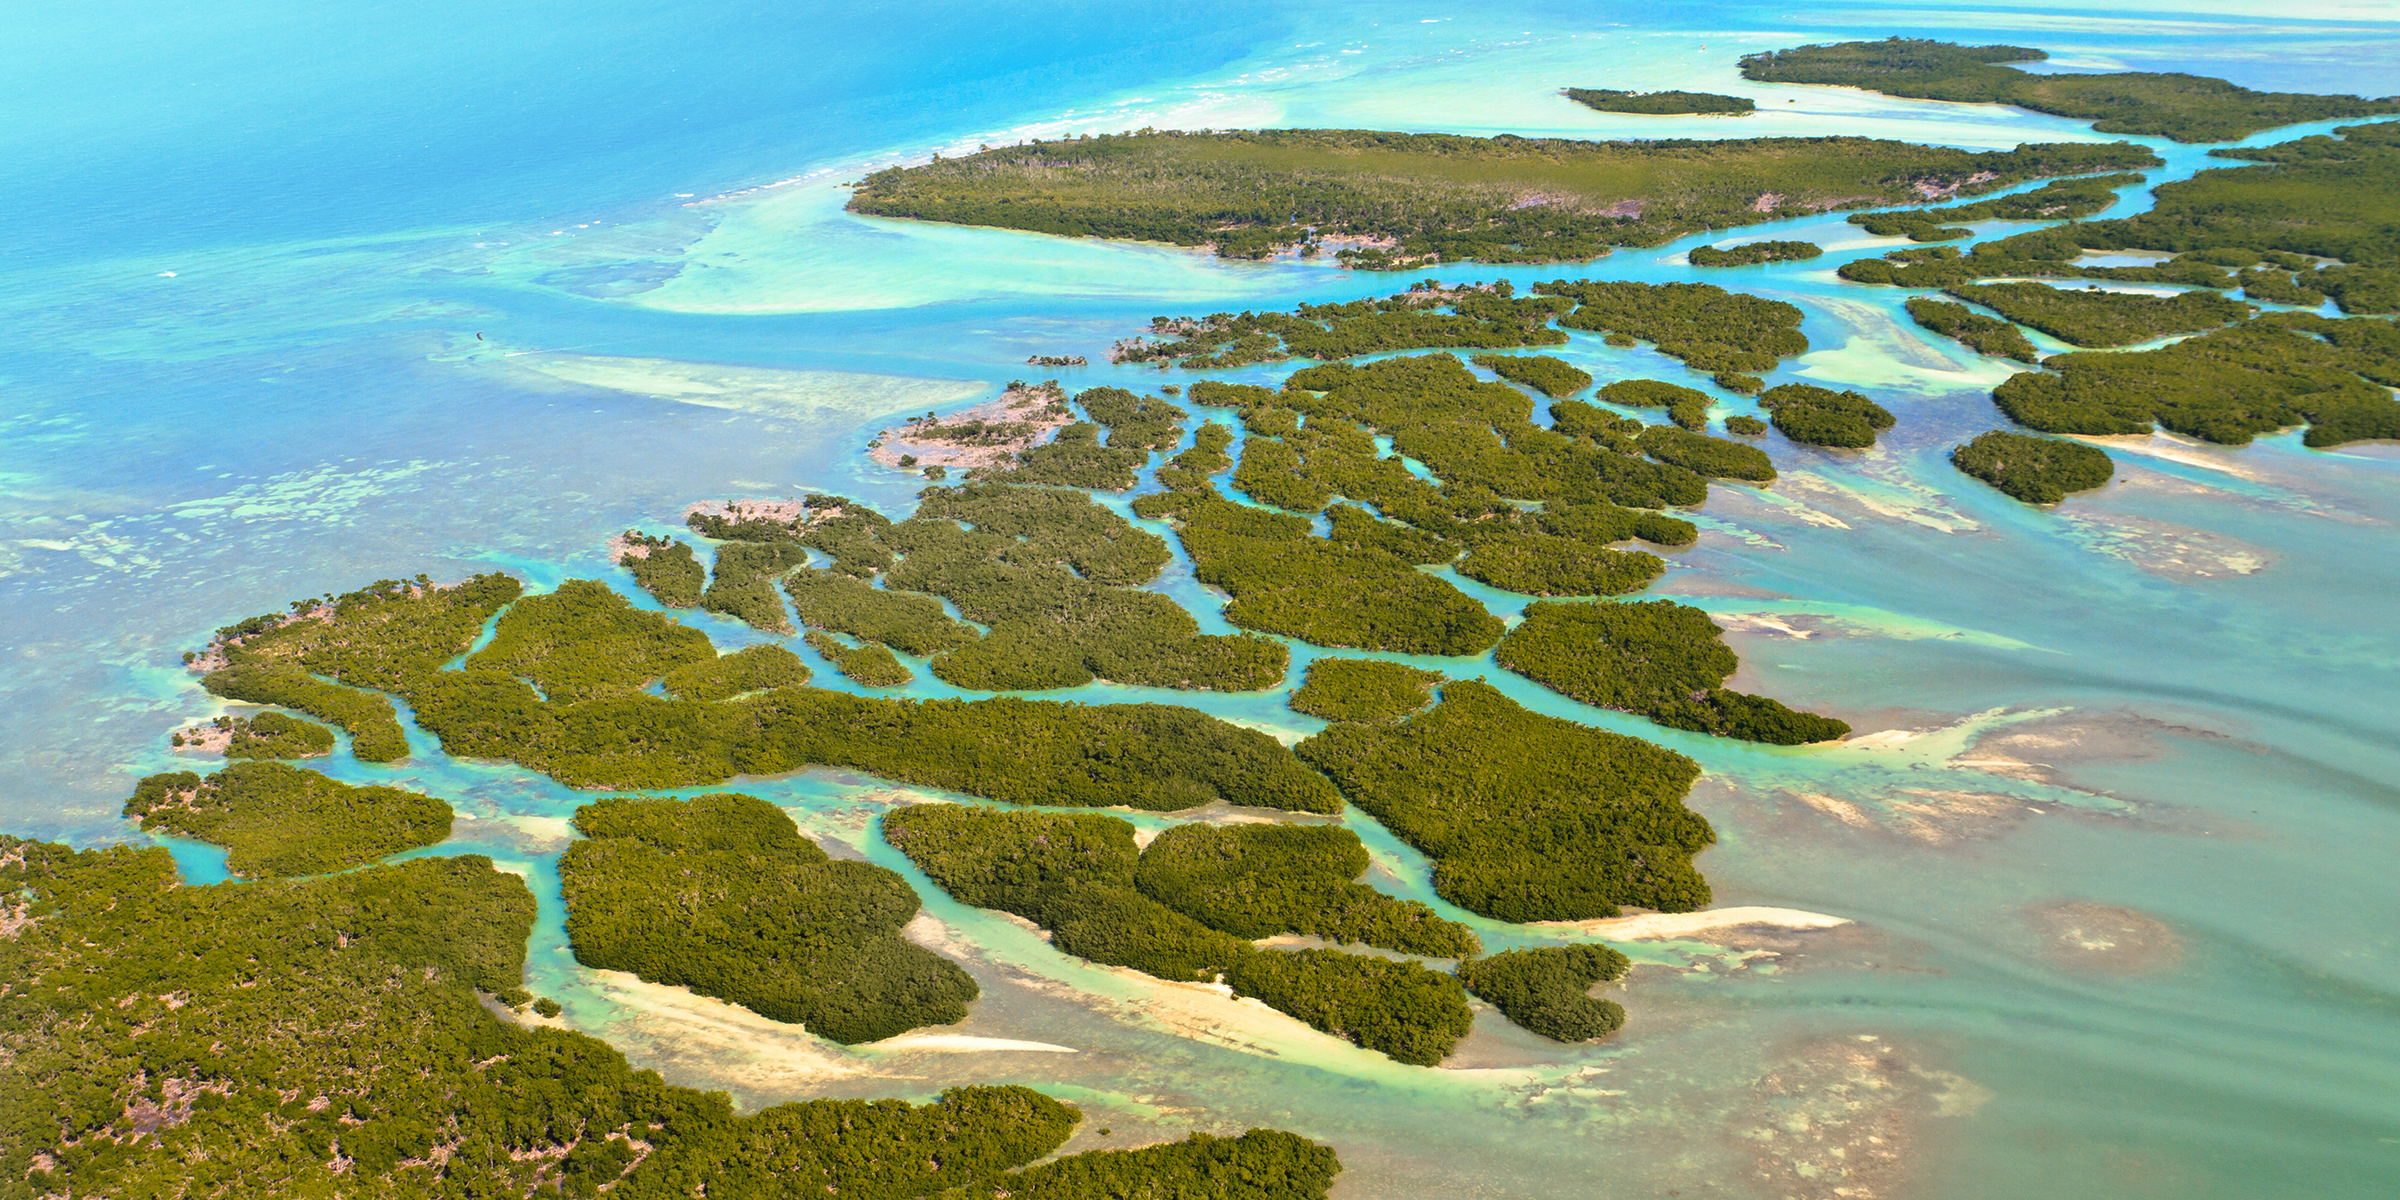 Aerial view of Florida, Keys | Source: Shutterstock